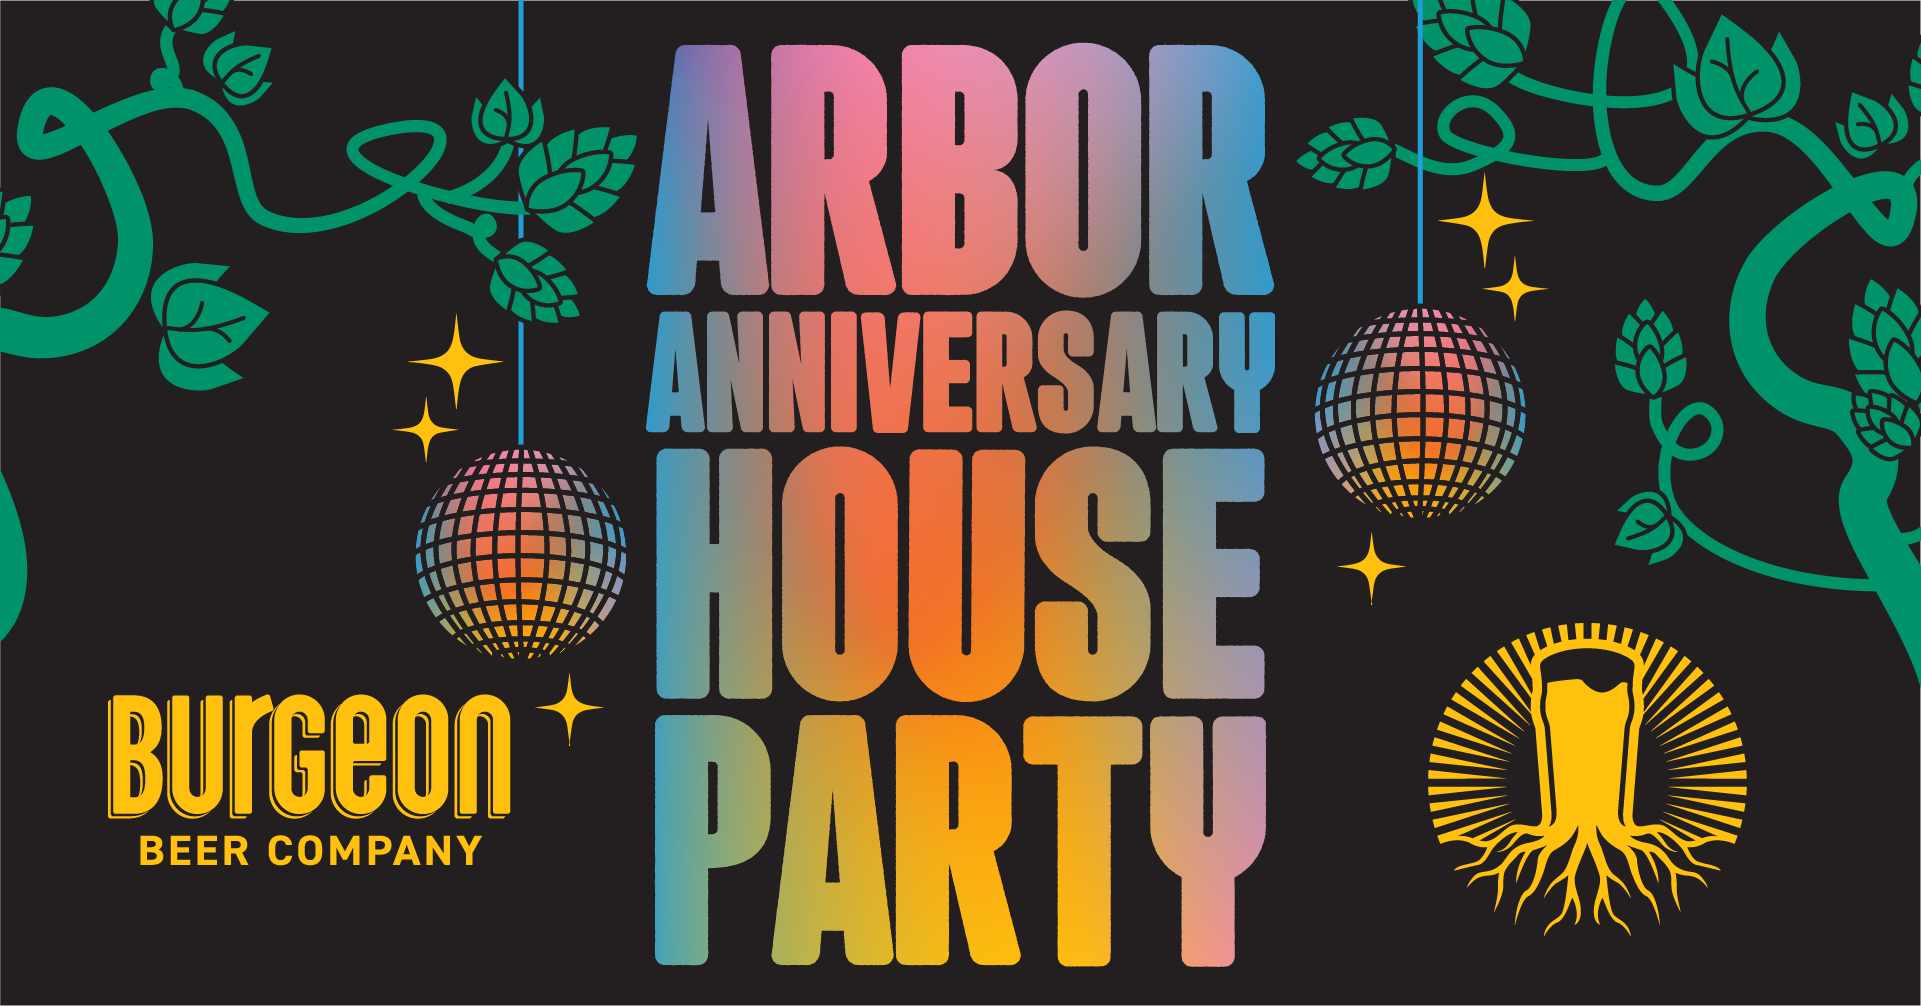 Arbor Anniversary House Party